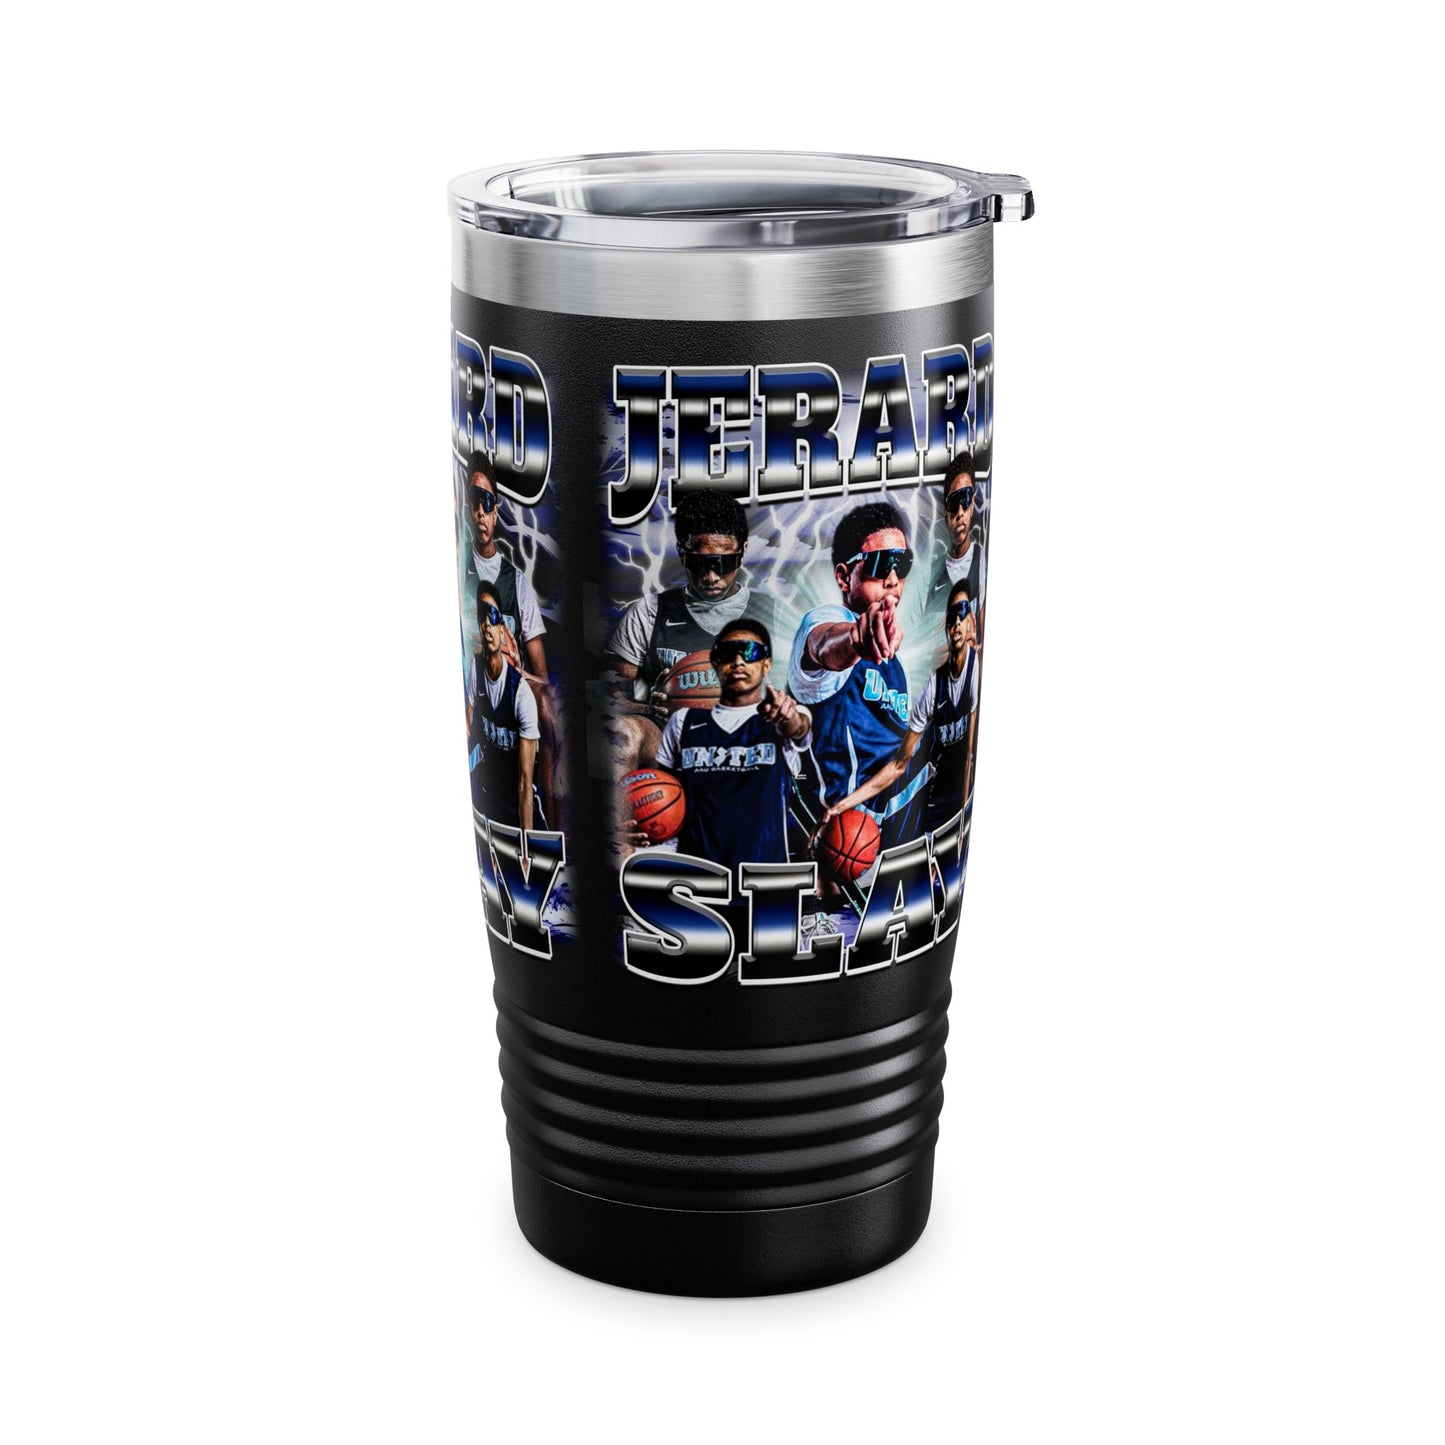 Jerard Slay Stainless Steal Tumbler